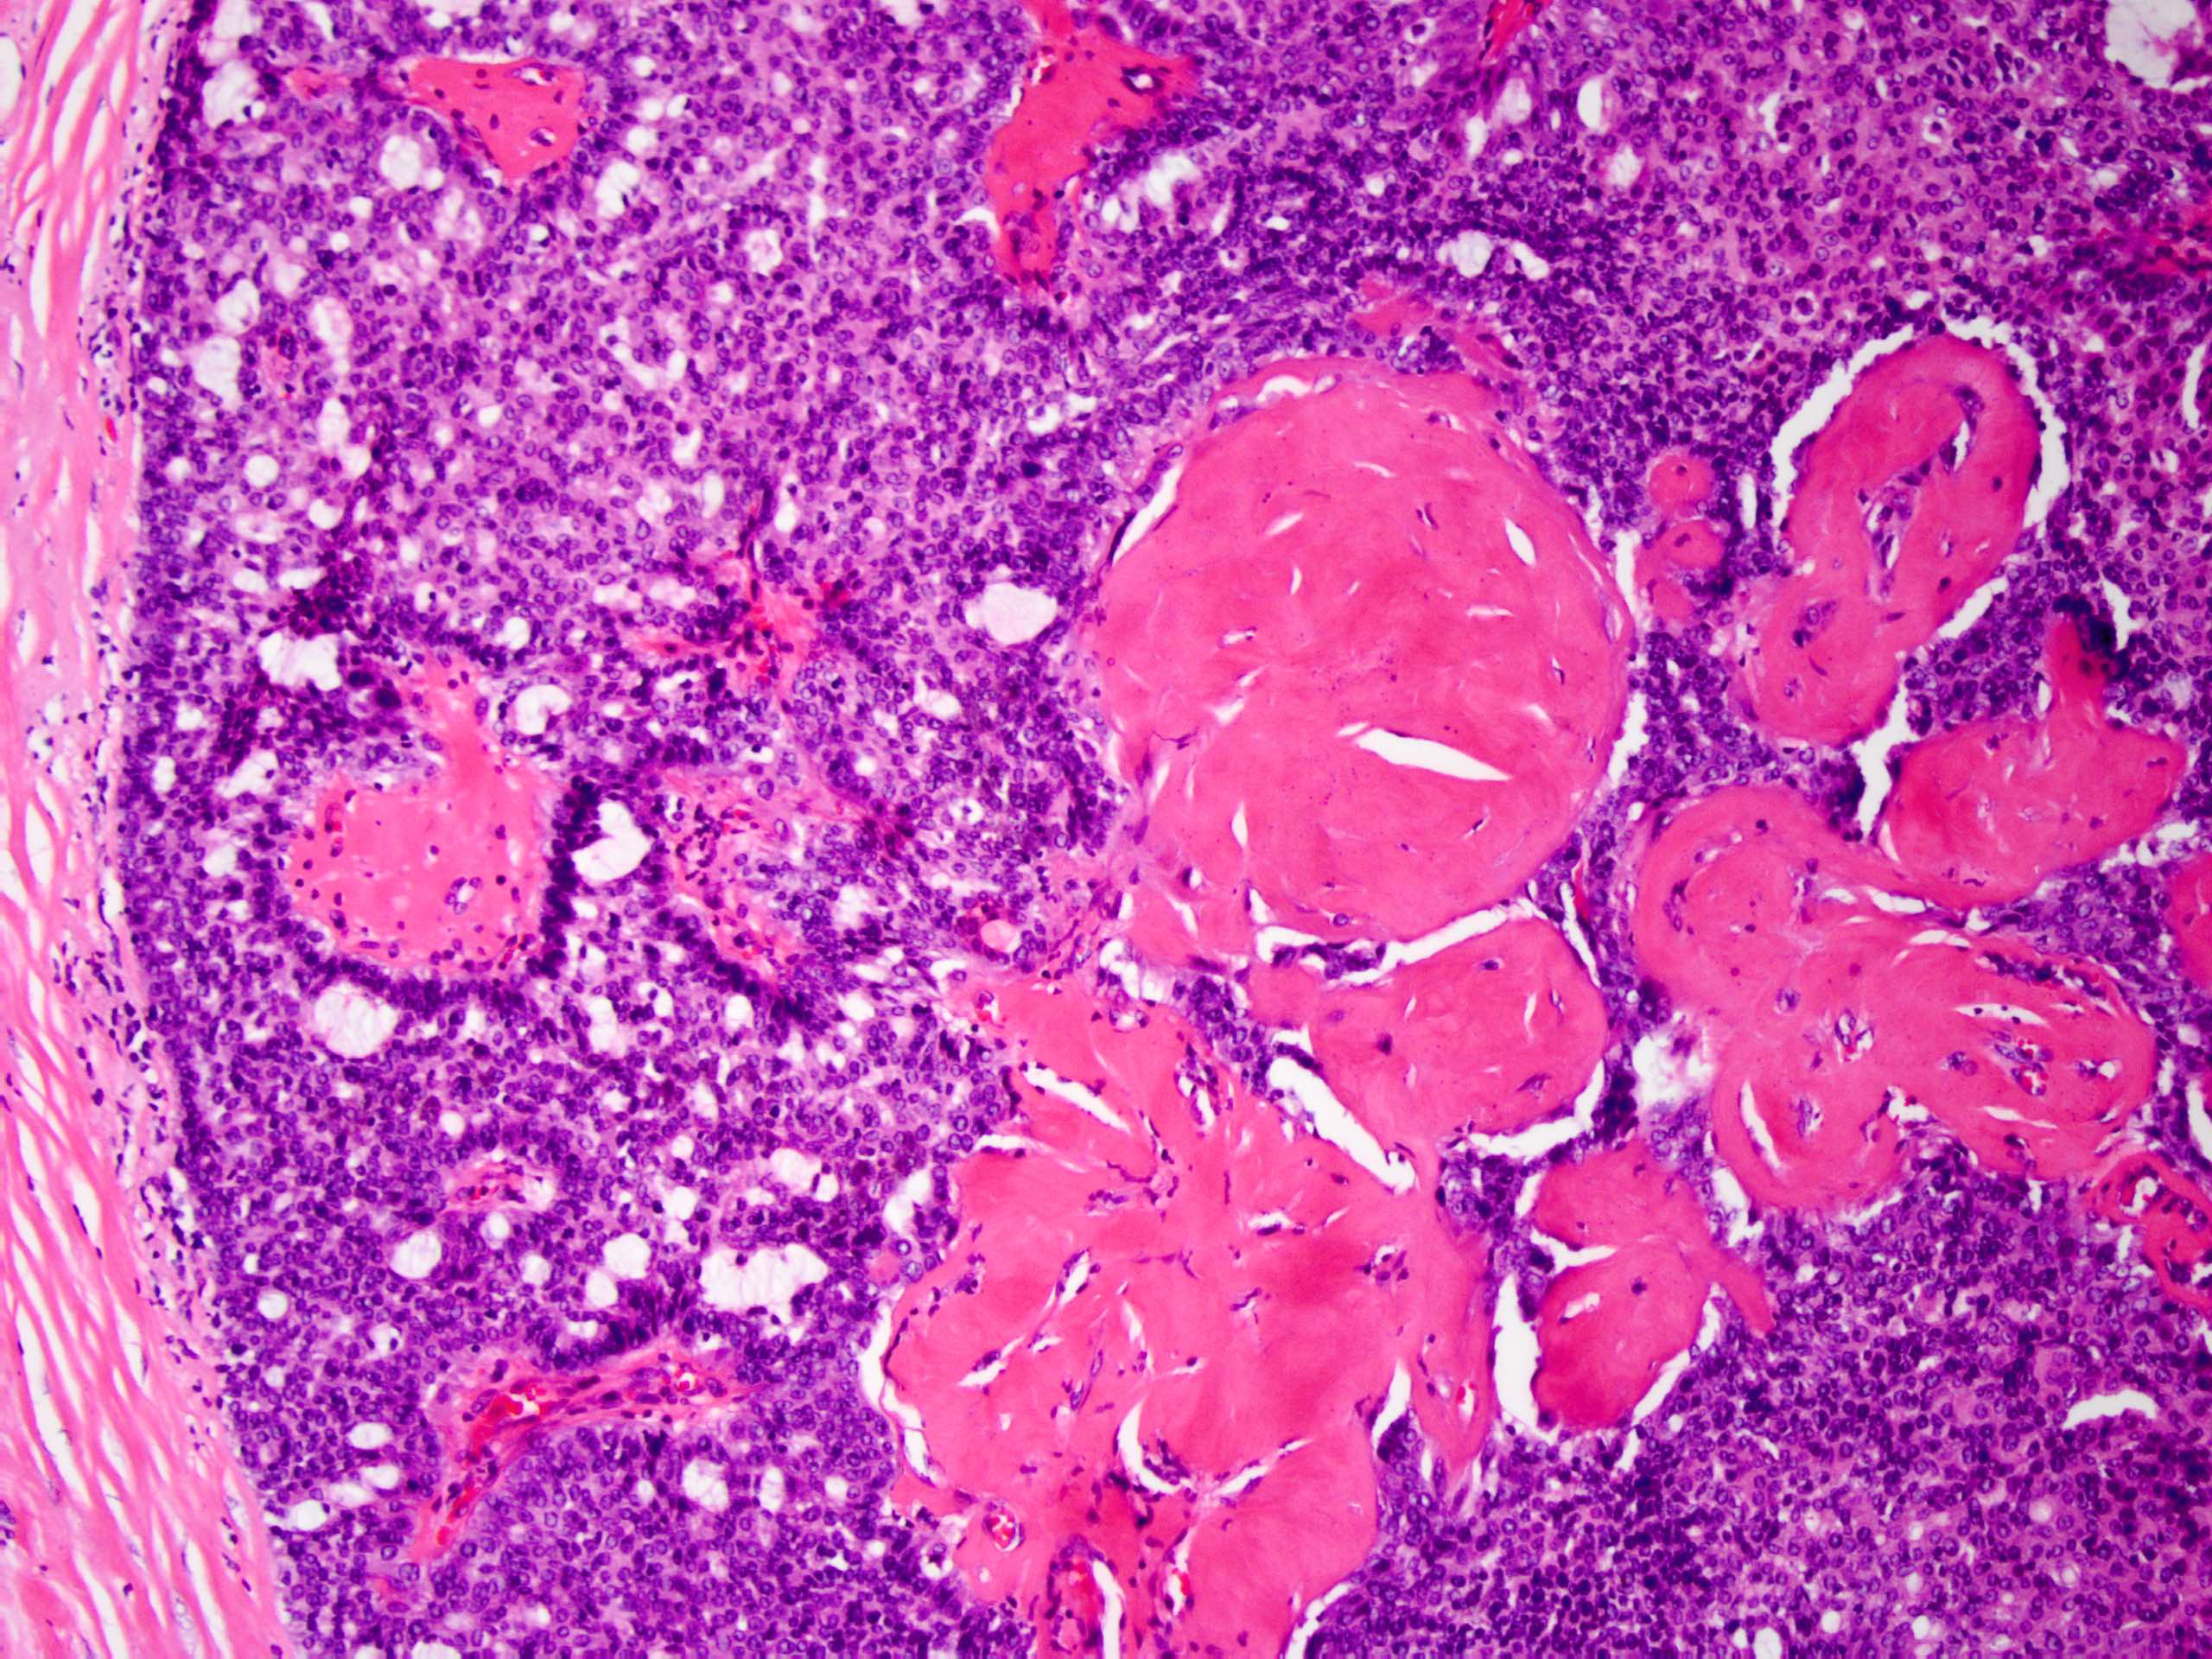 intraductal papilloma with atypical cells